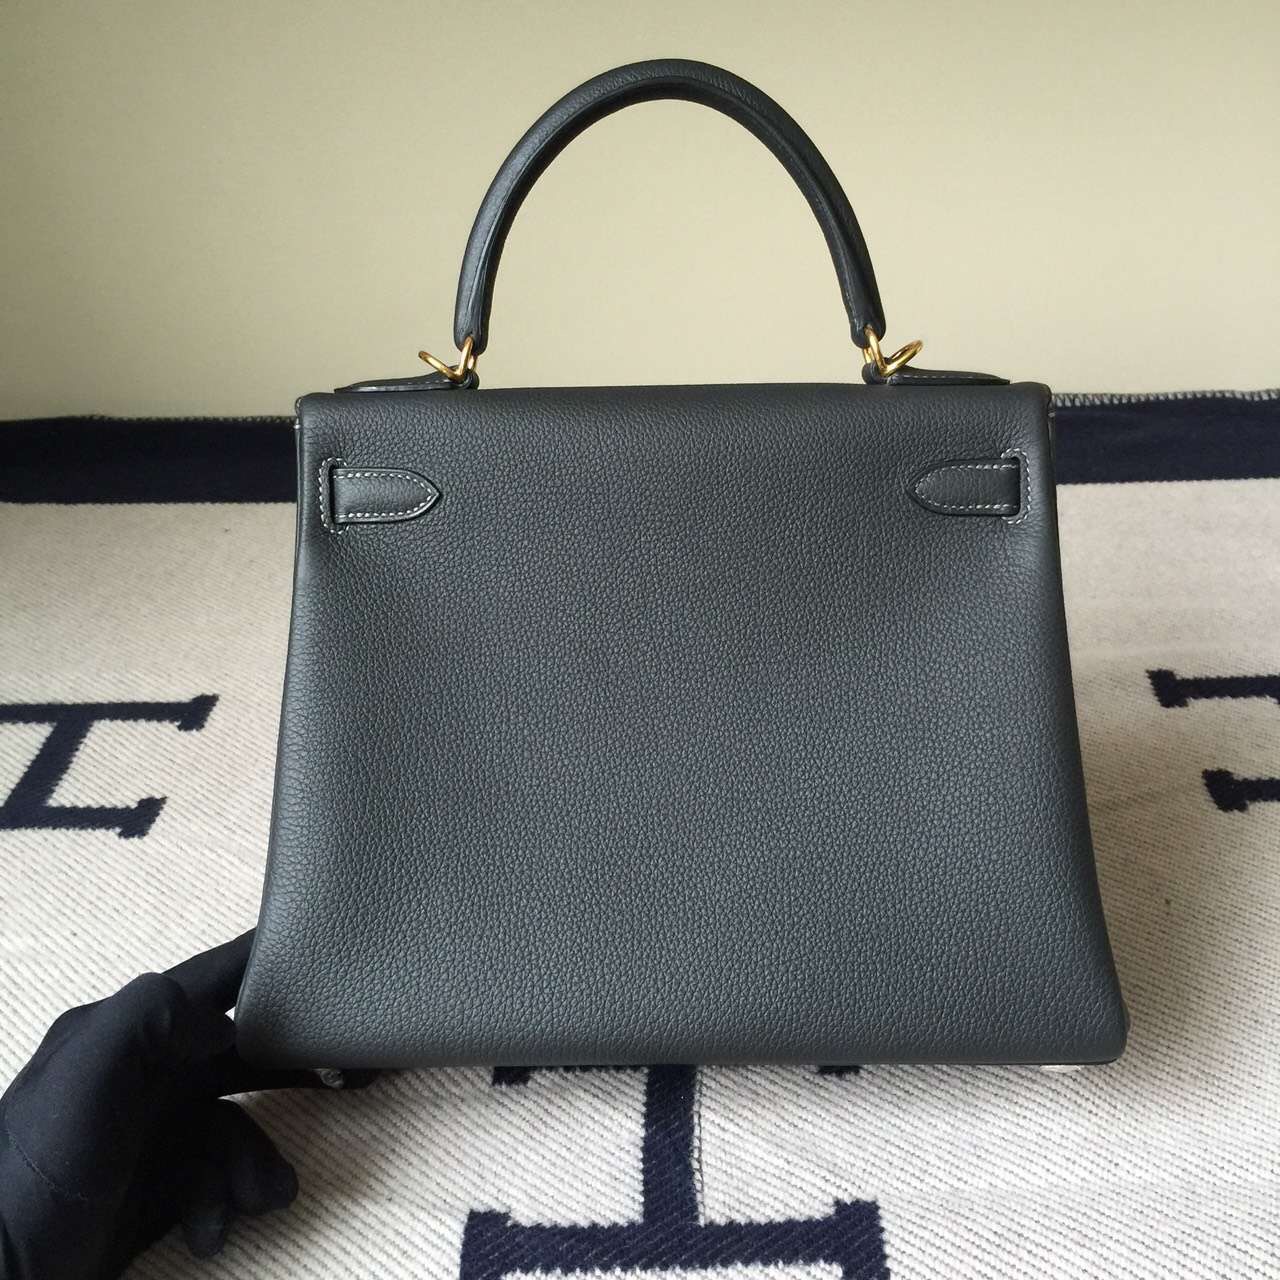 Hand Stitching Hermes Togo Leather Retourne Kelly28cm in Graphite grey